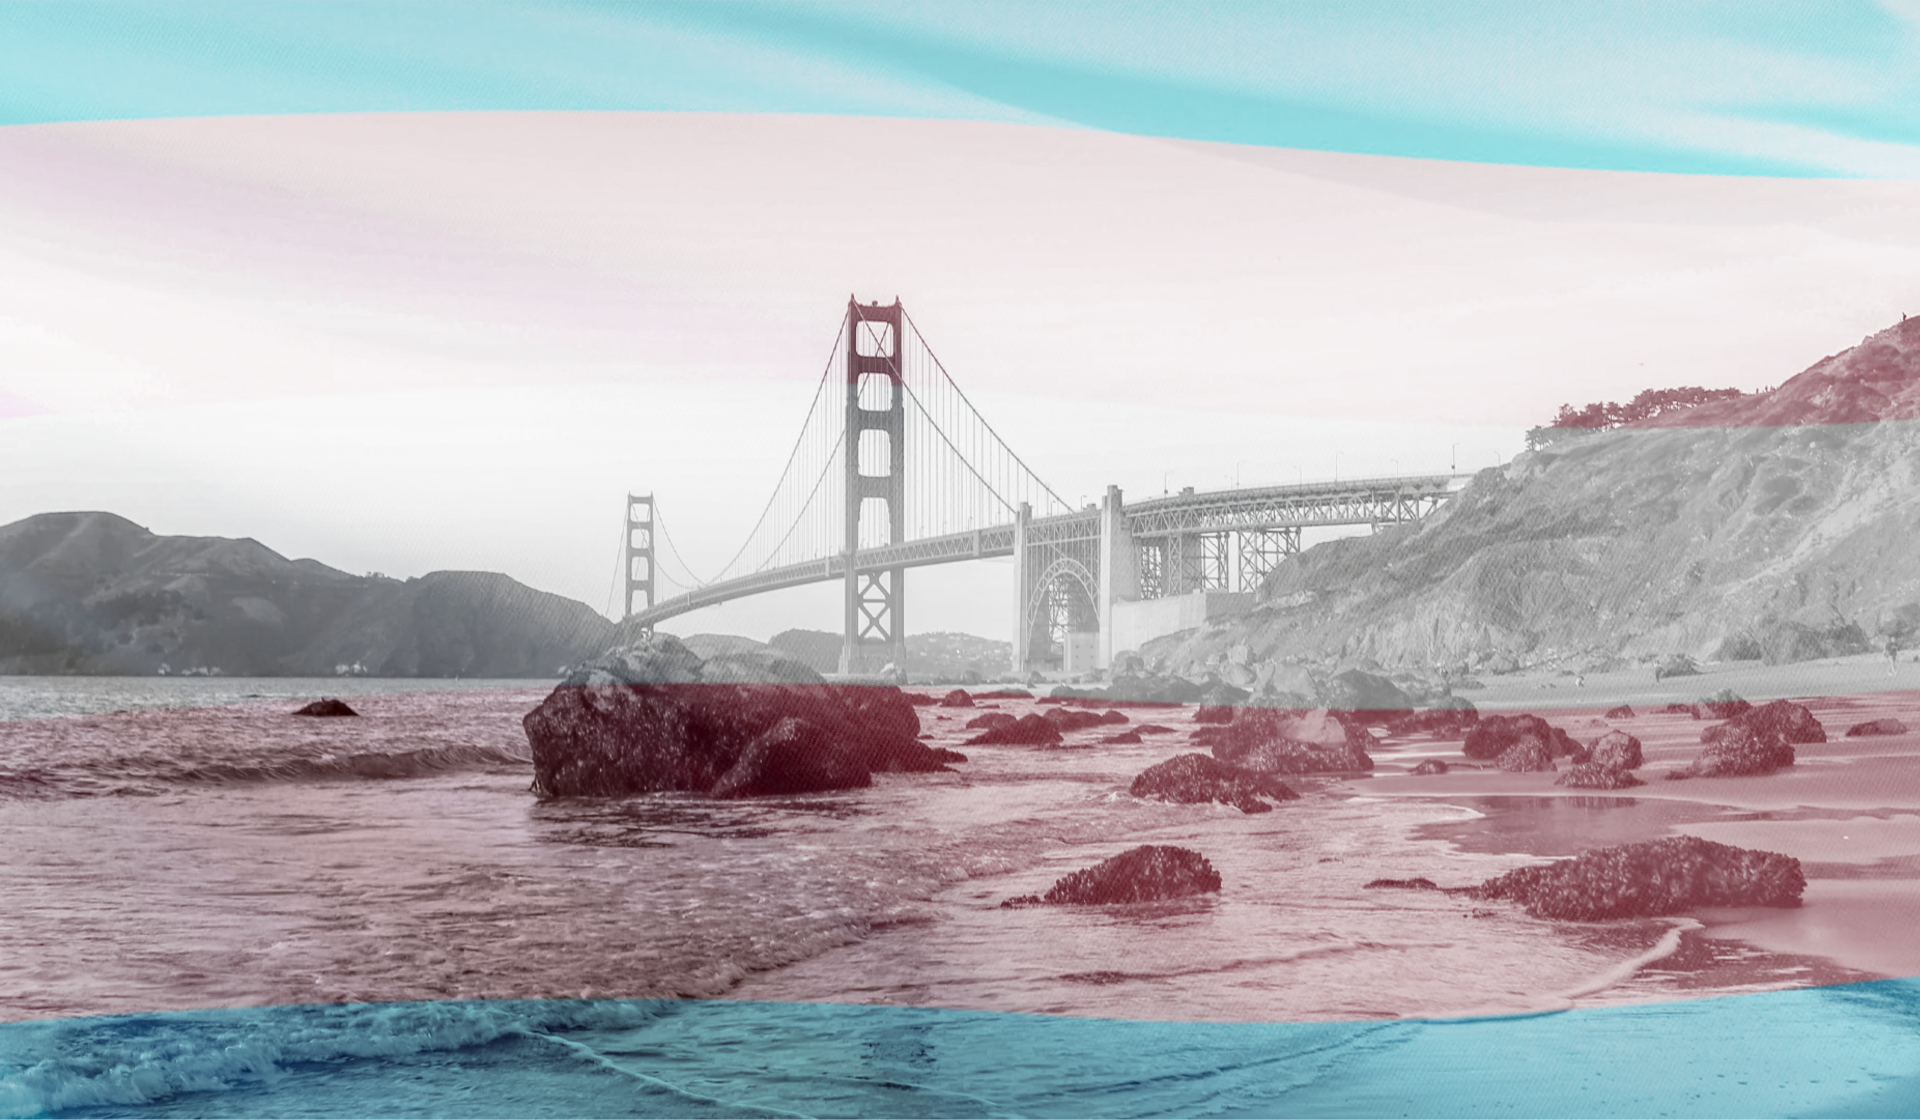 San Francisco launches income programme for trans community